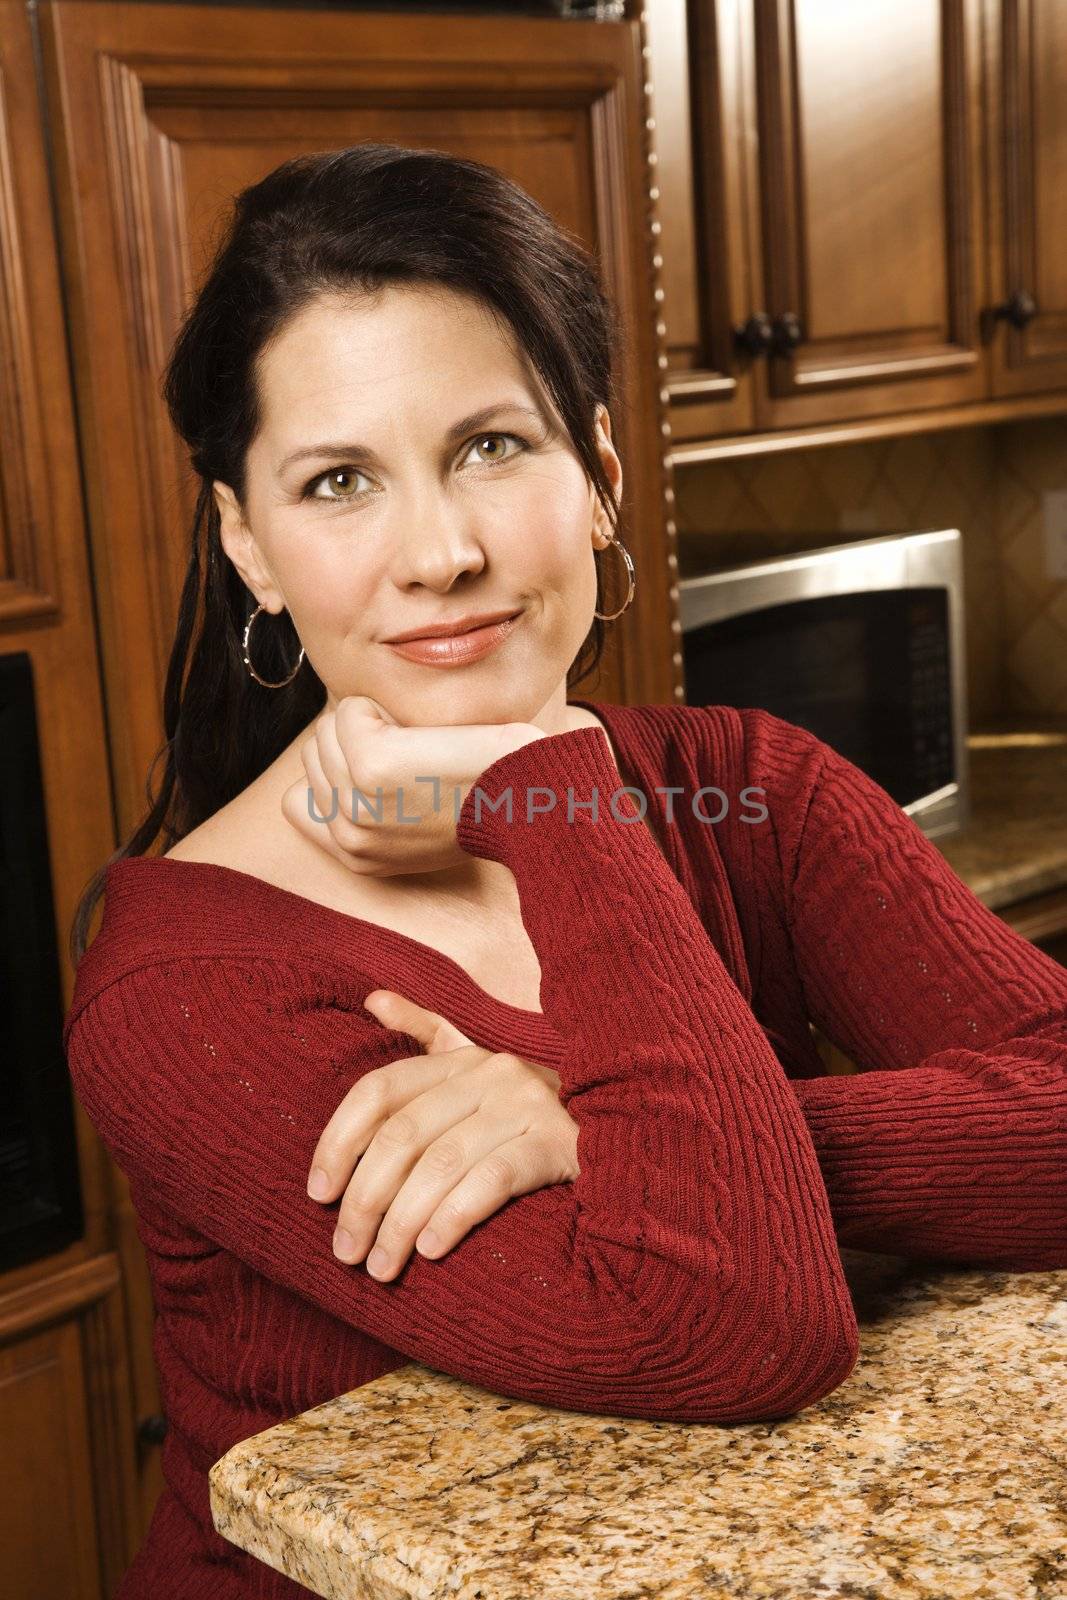 Caucasian woman leaning on kitchen counter looking at viewer.